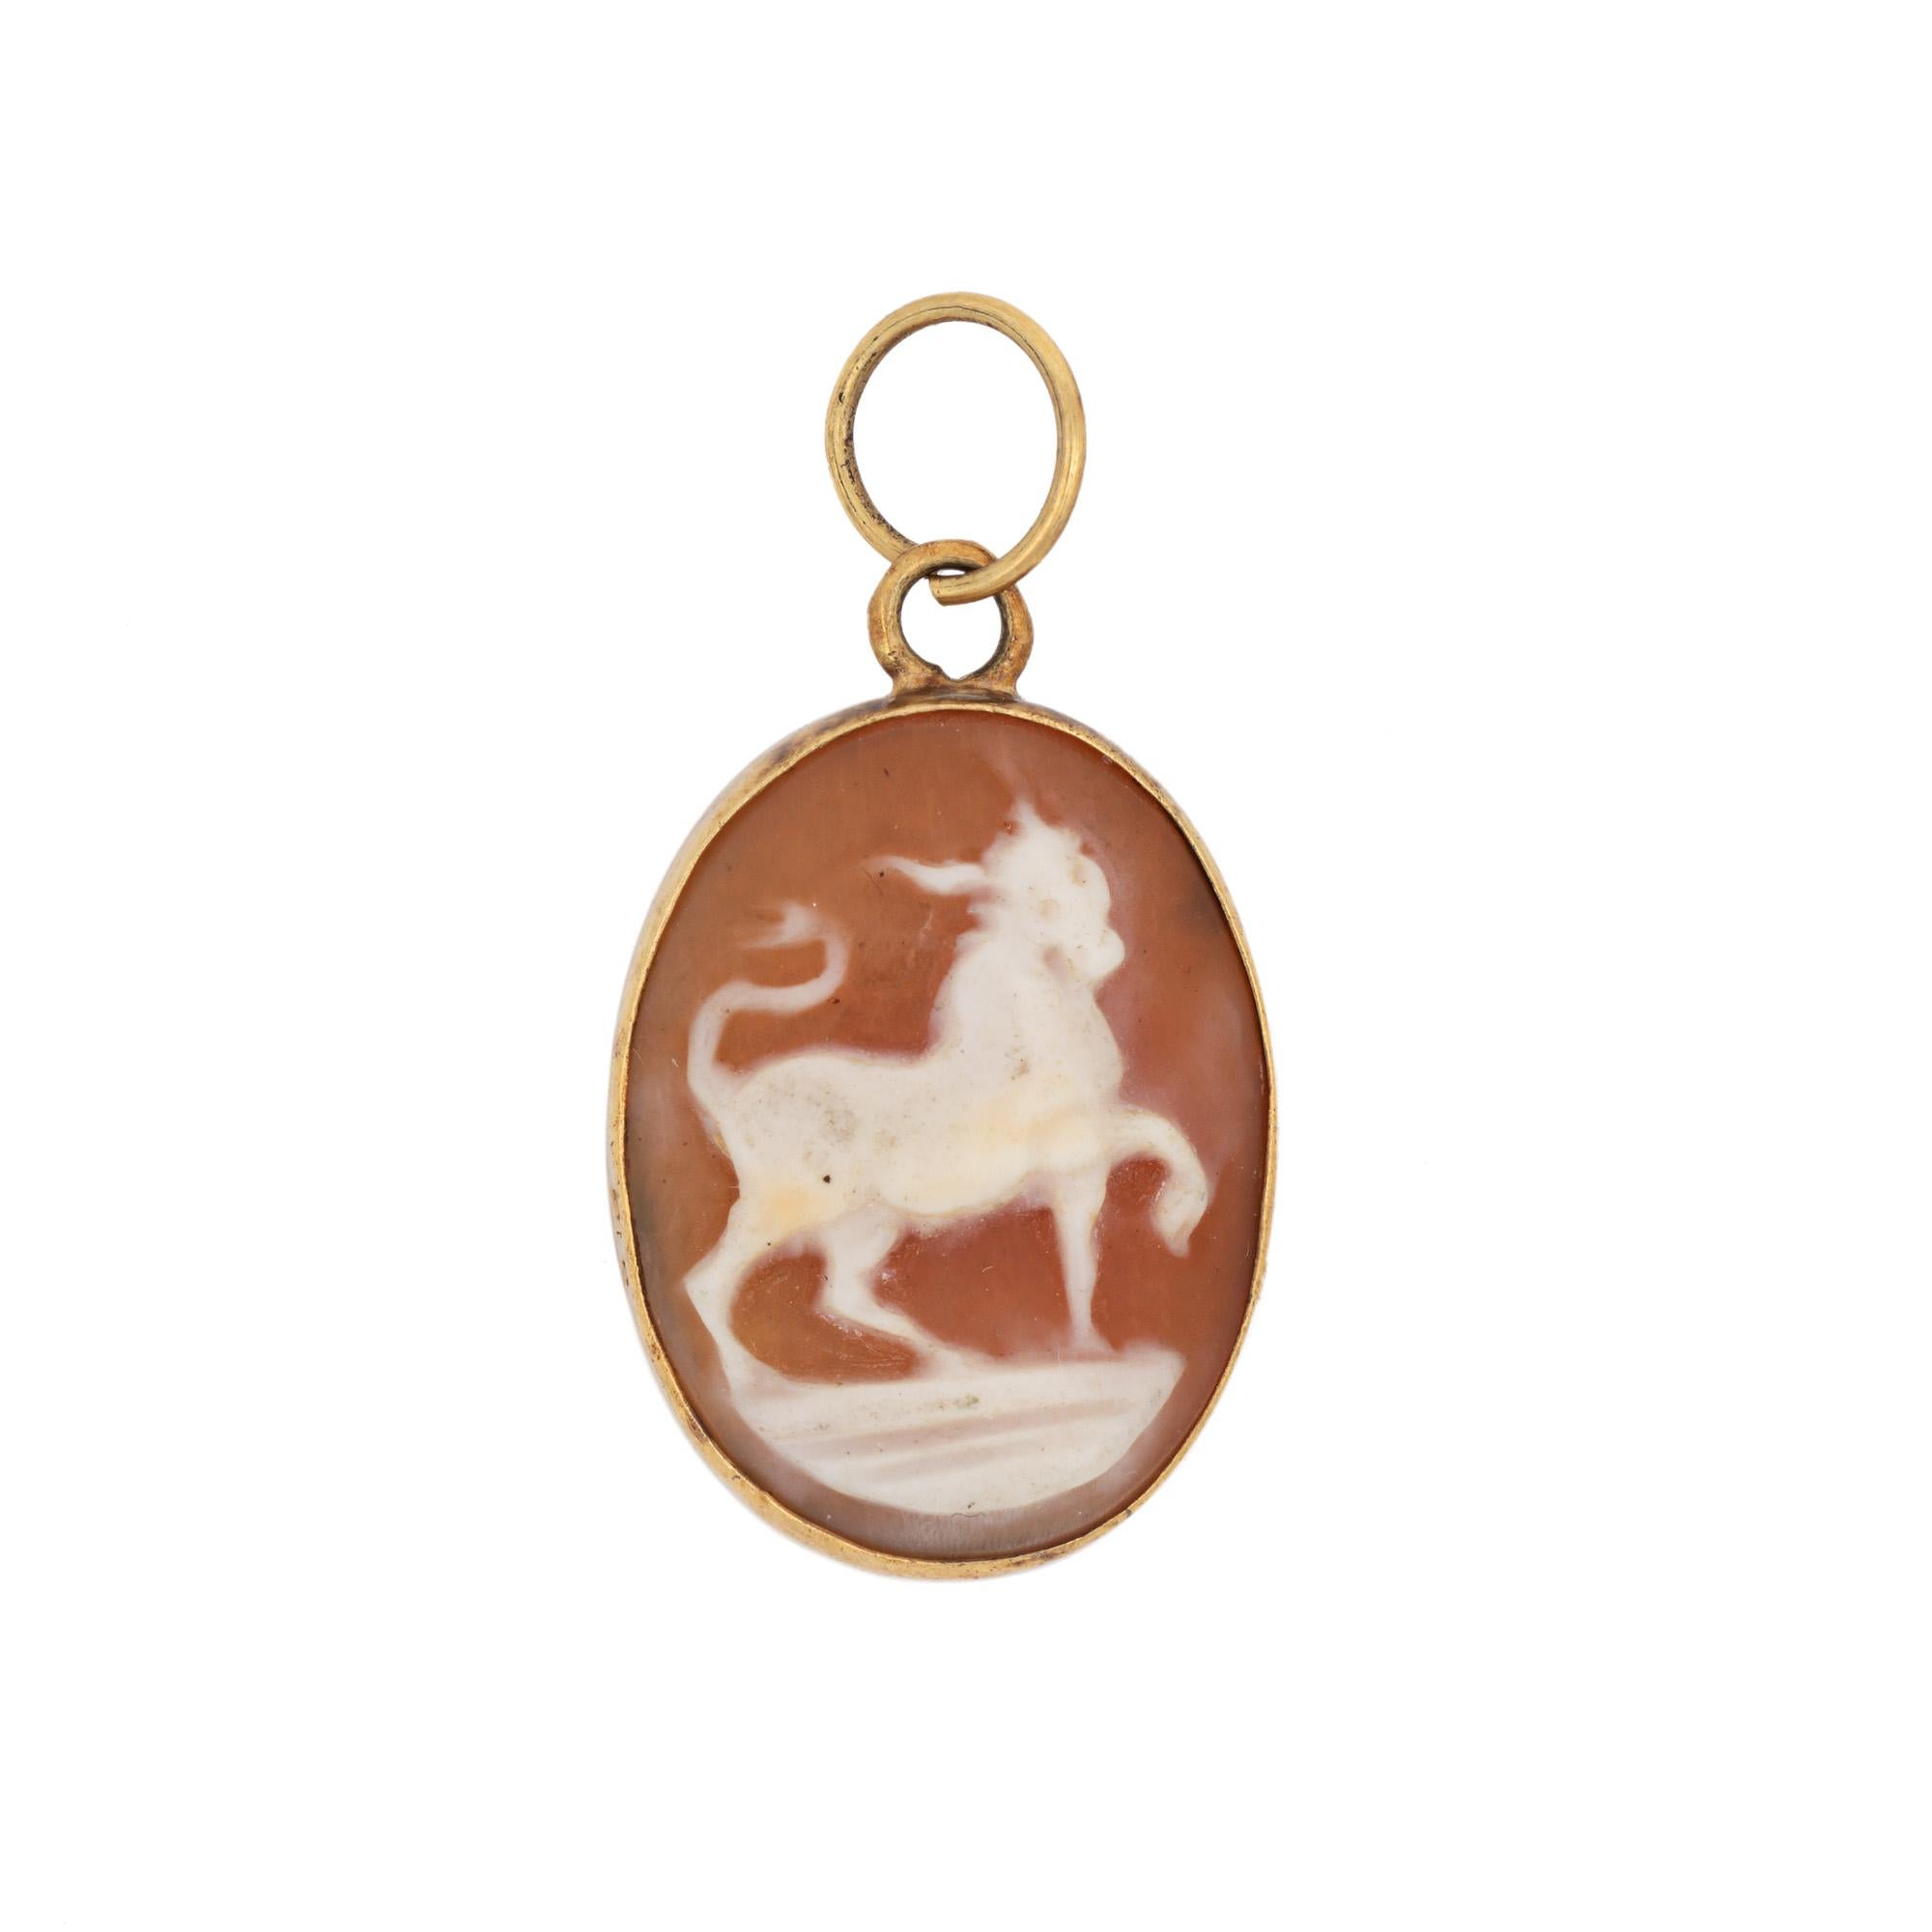 
Finely detailed vintage double sided cameo pendant crafted in 14 karat yellow gold (circa 1950s to 1960s). 

Shell cameo measures 20mm x 15mm. 

The distinct pendant features a carved cameo depicting the Three Graces with the reverse side an